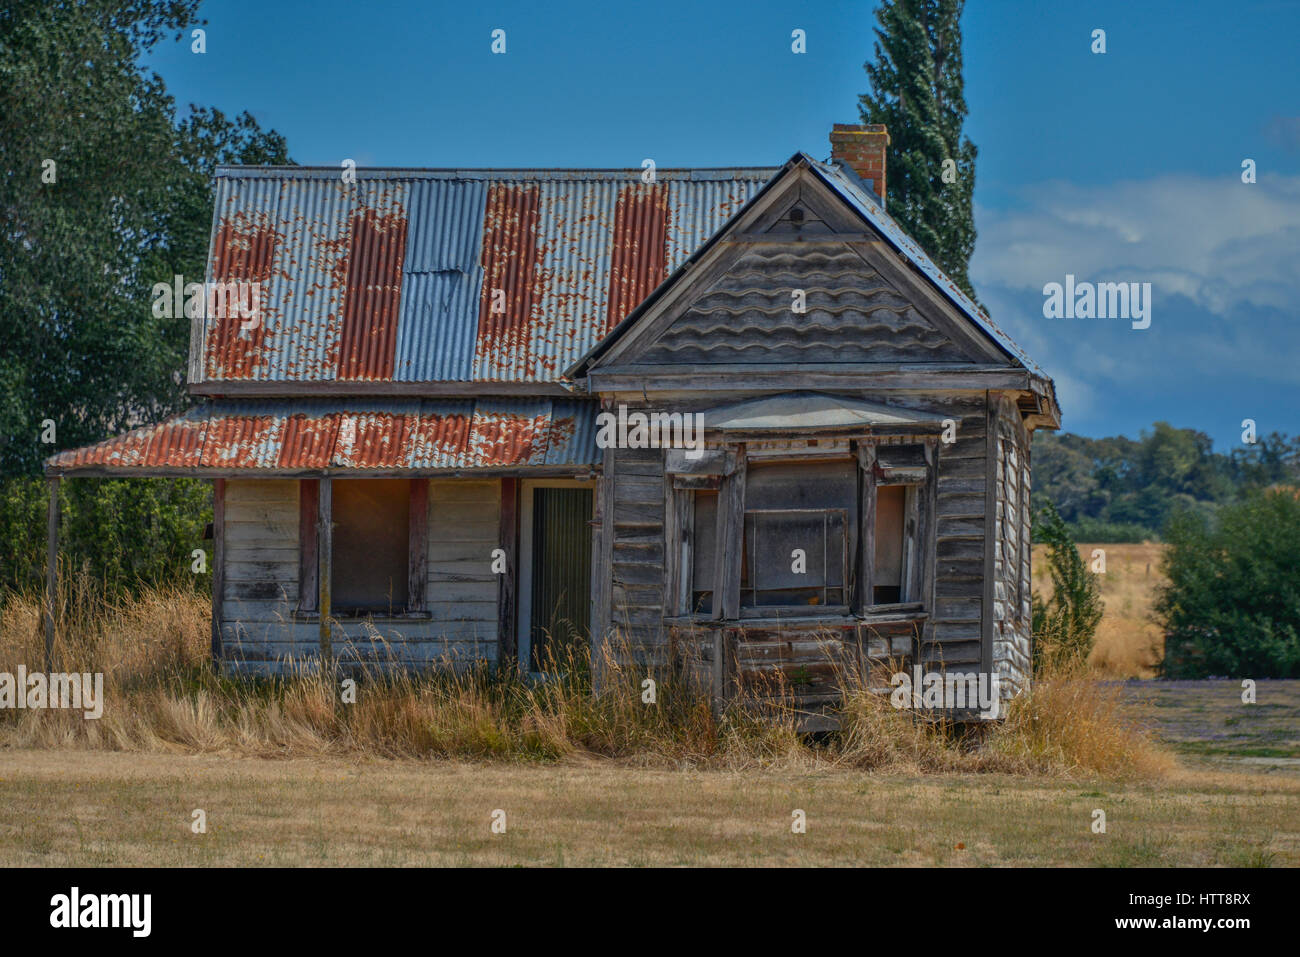 Abandoned wooden house in the Hawkes Bay region of New Zealand. Stock Photo